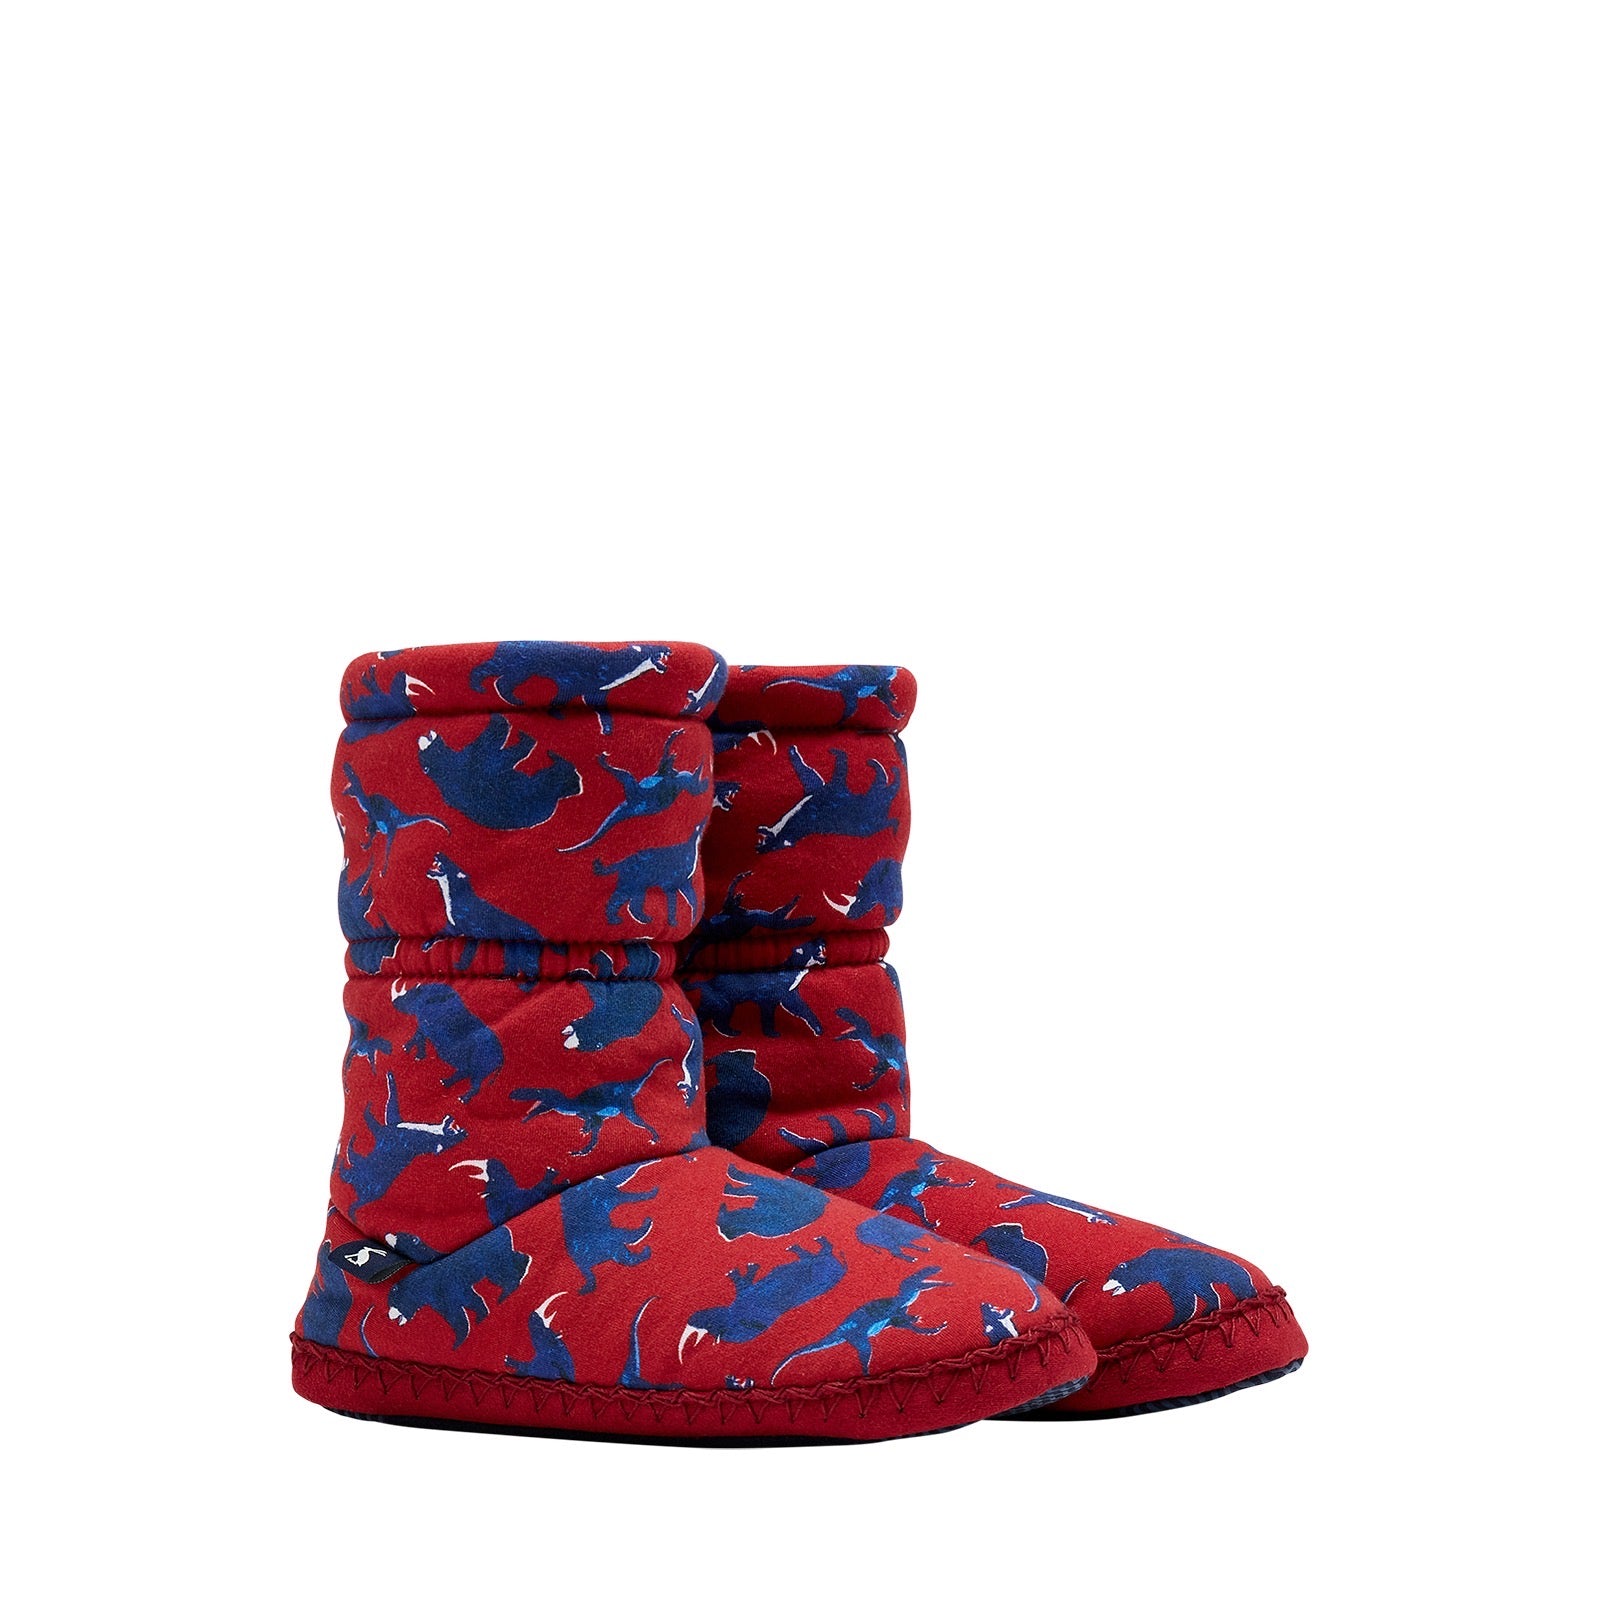 Joules Red Beasts Padabout Slippers 216679 Footwear UK 8-9 / Red,UK 10-11 / Red,UK 12-13 / Red,UK 1-2 / Red,UK 3-4 / Red